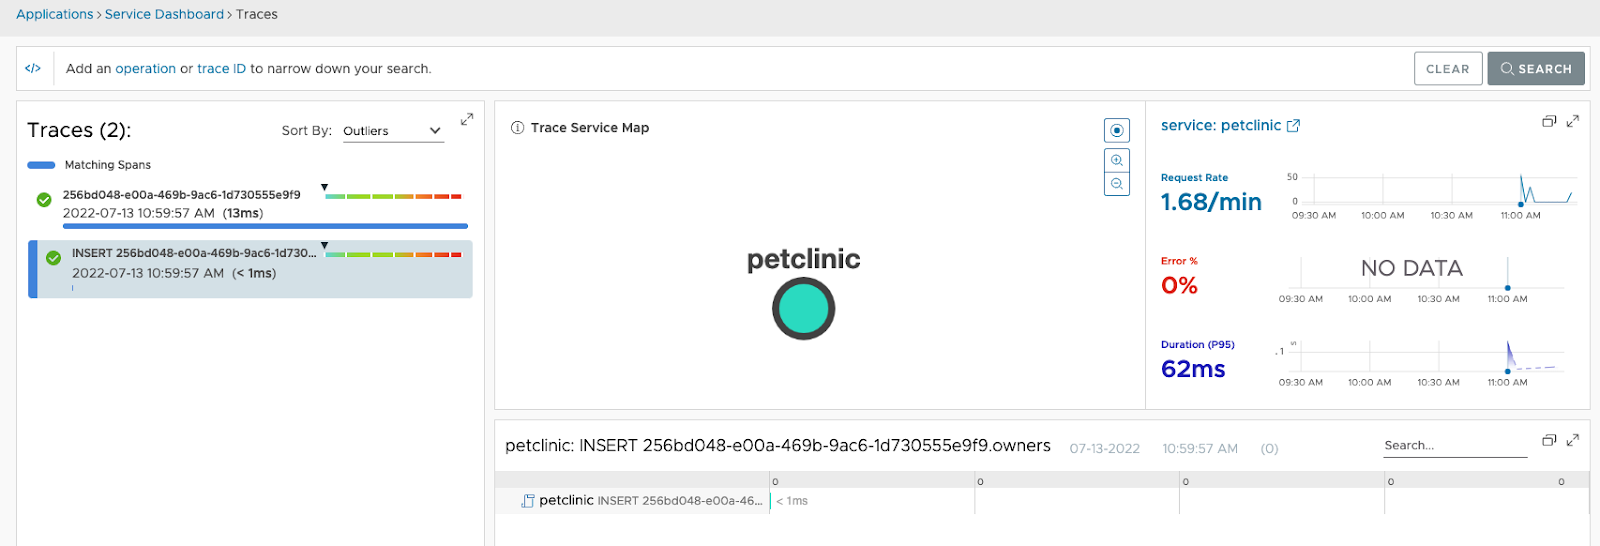 A screenshot showing the Traces Browser with the traces that were sent from the Petclinic application.